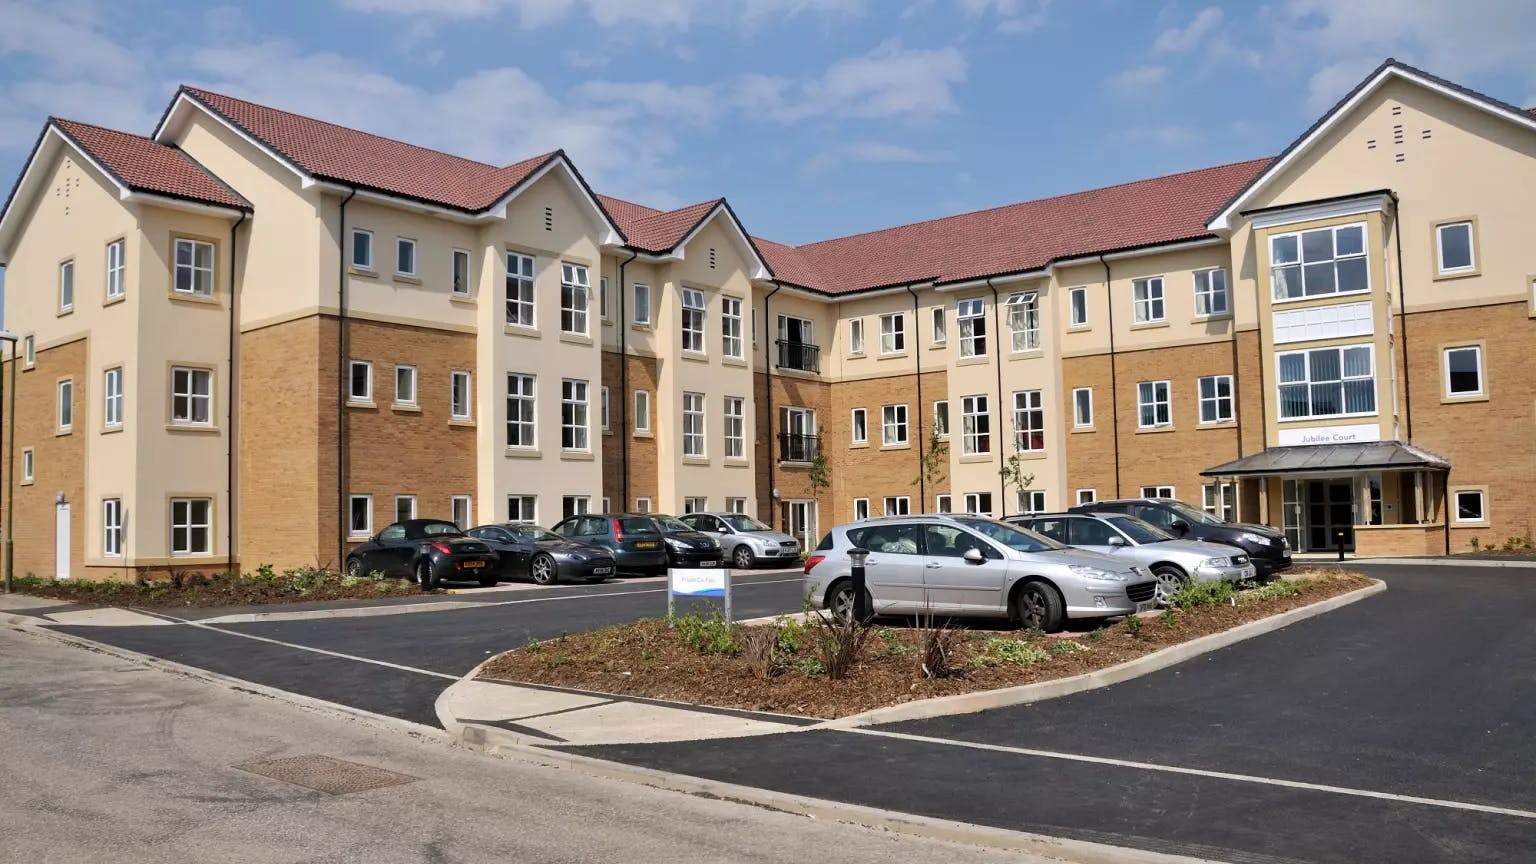 Exterior of Jubilee Court care home in Stevenage, Hertfordshire